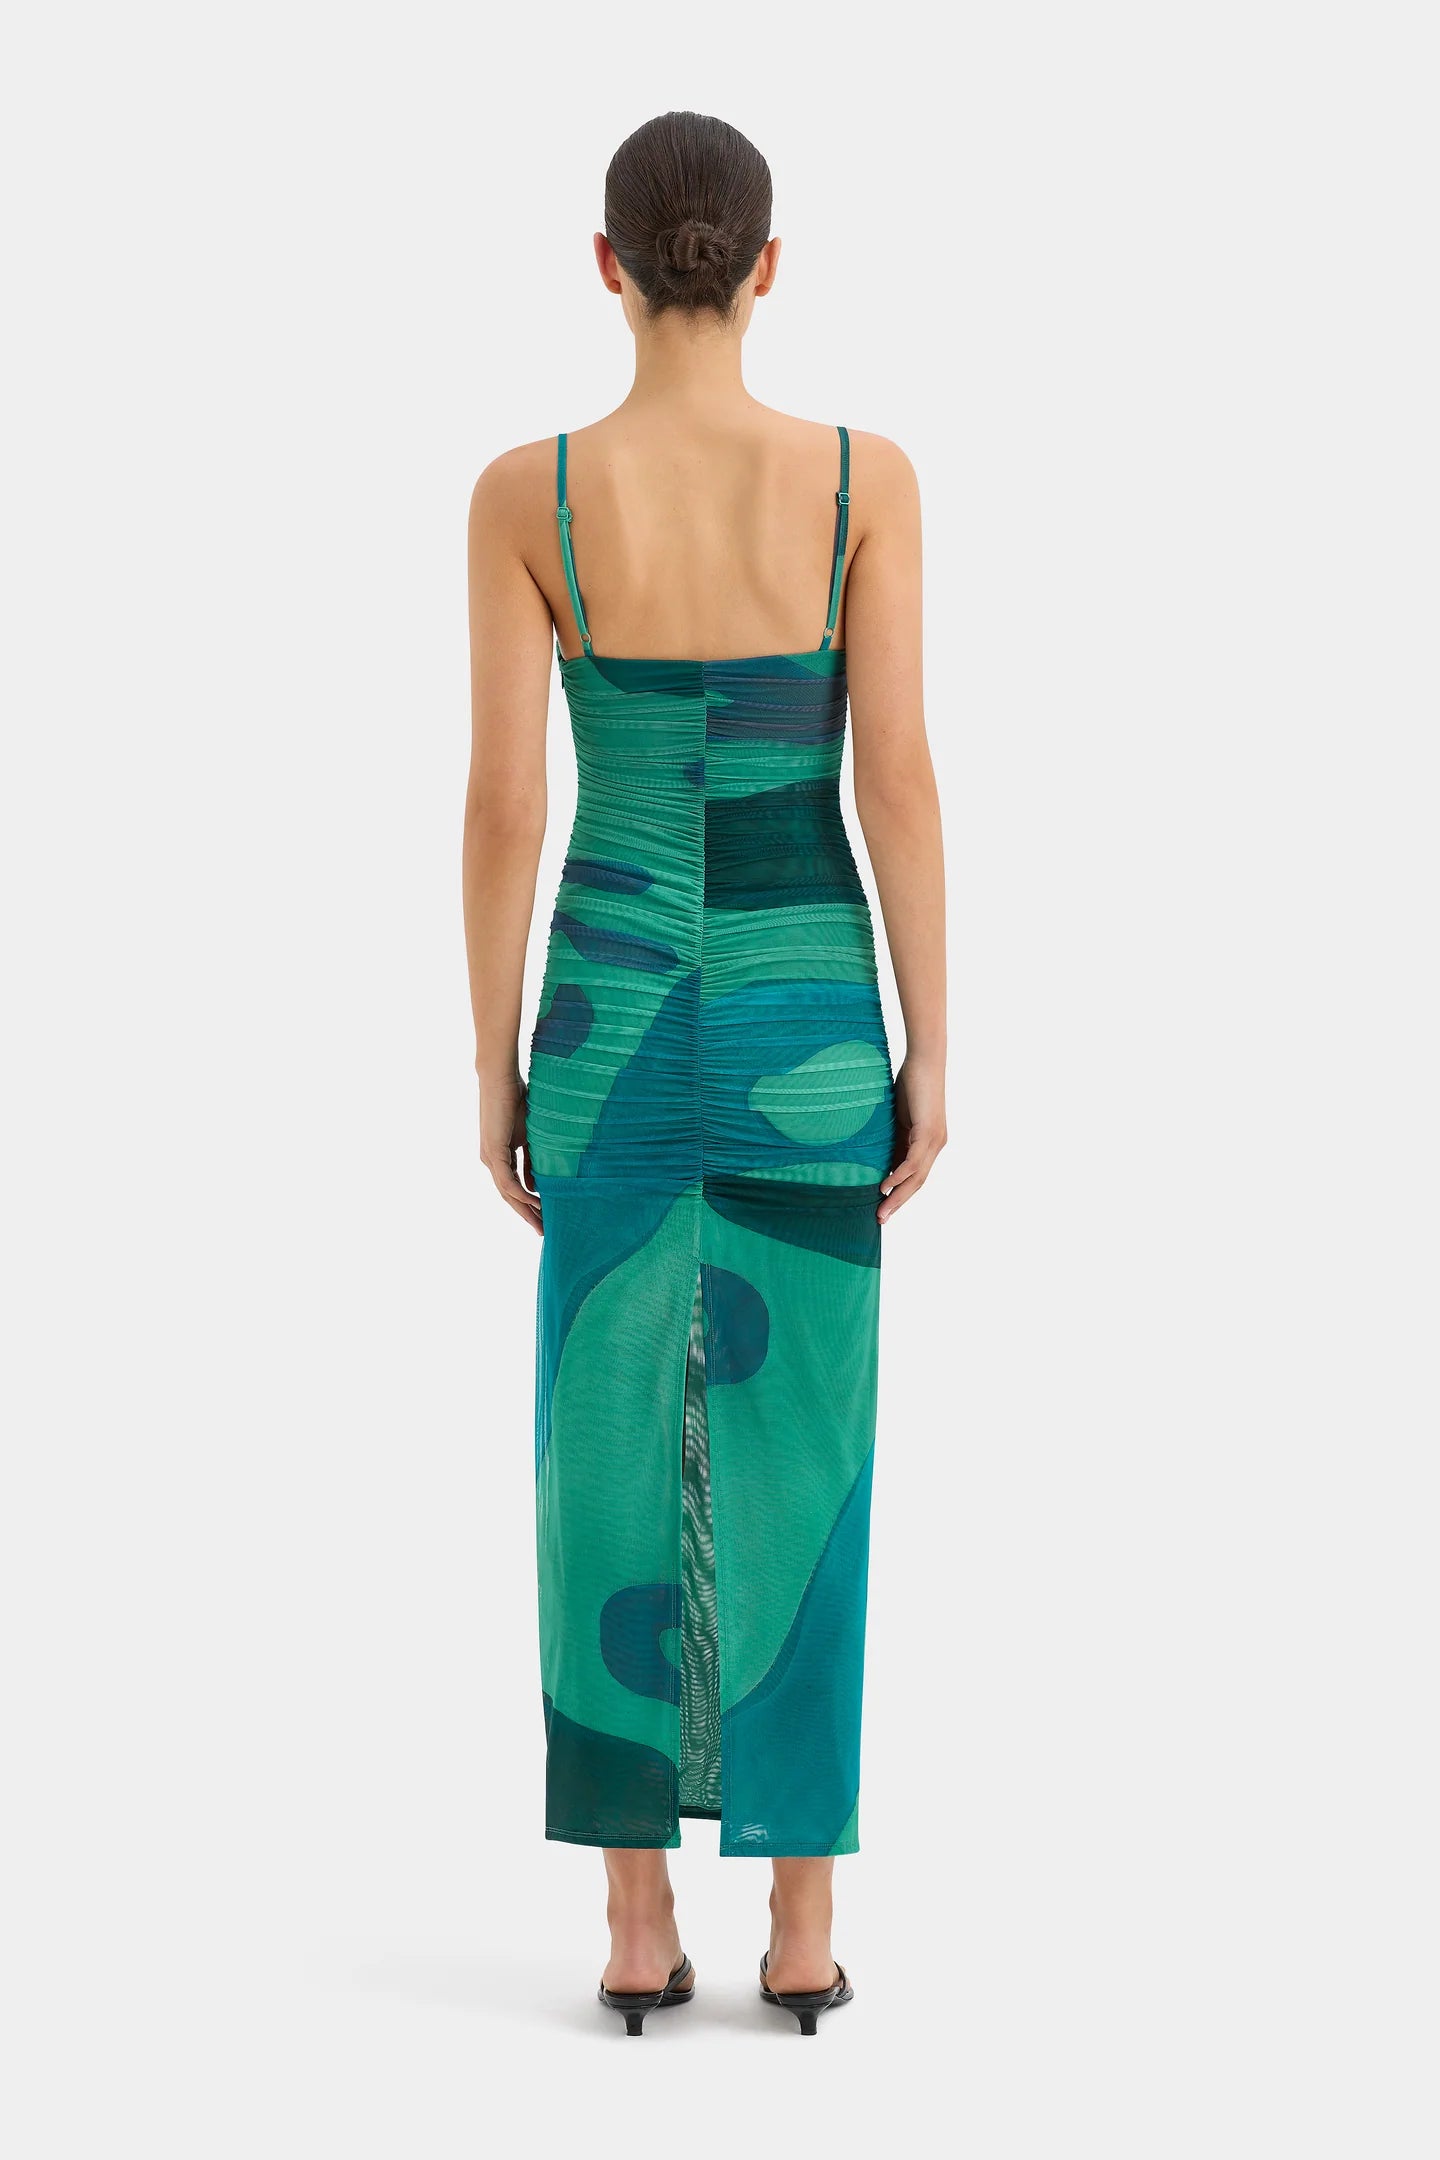 SIR the Label Frankie Gathered Midi Dress in Emerald Reflection